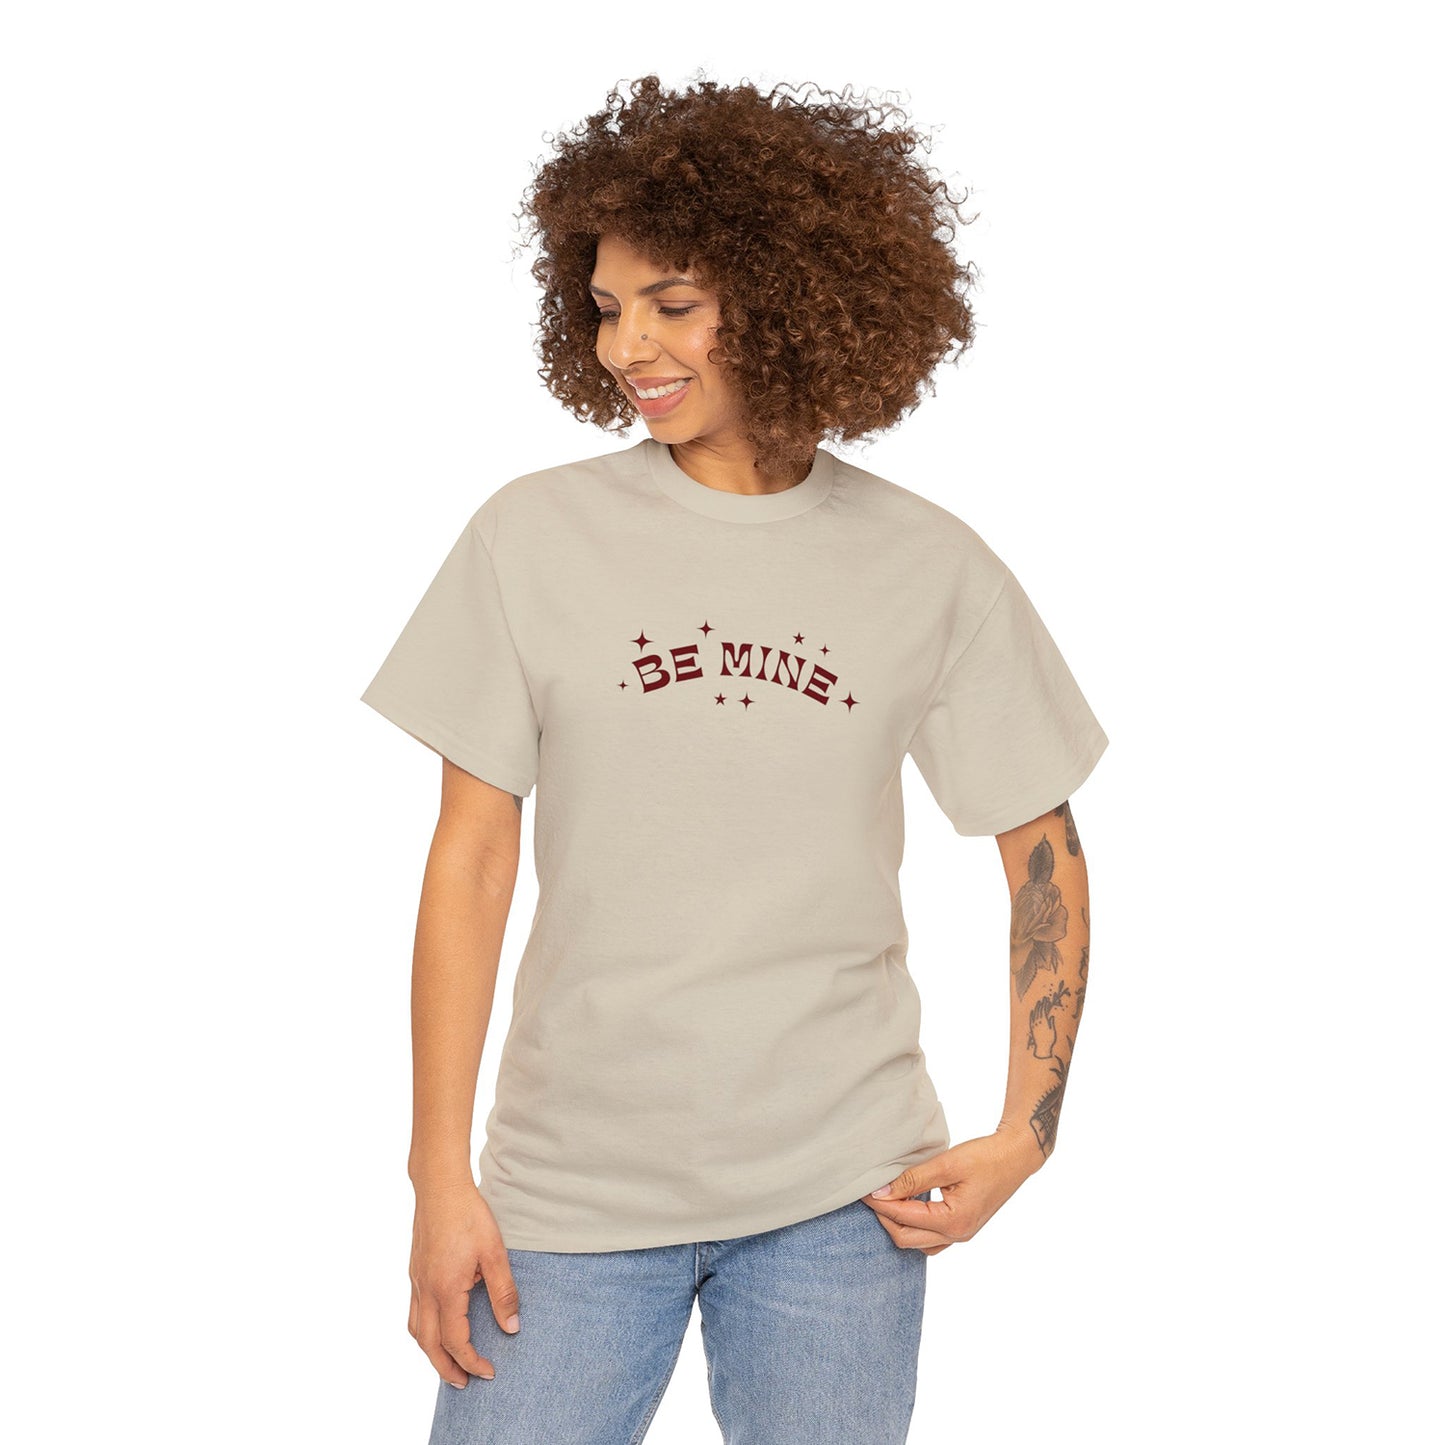 Women's Personalized Foundation Tee